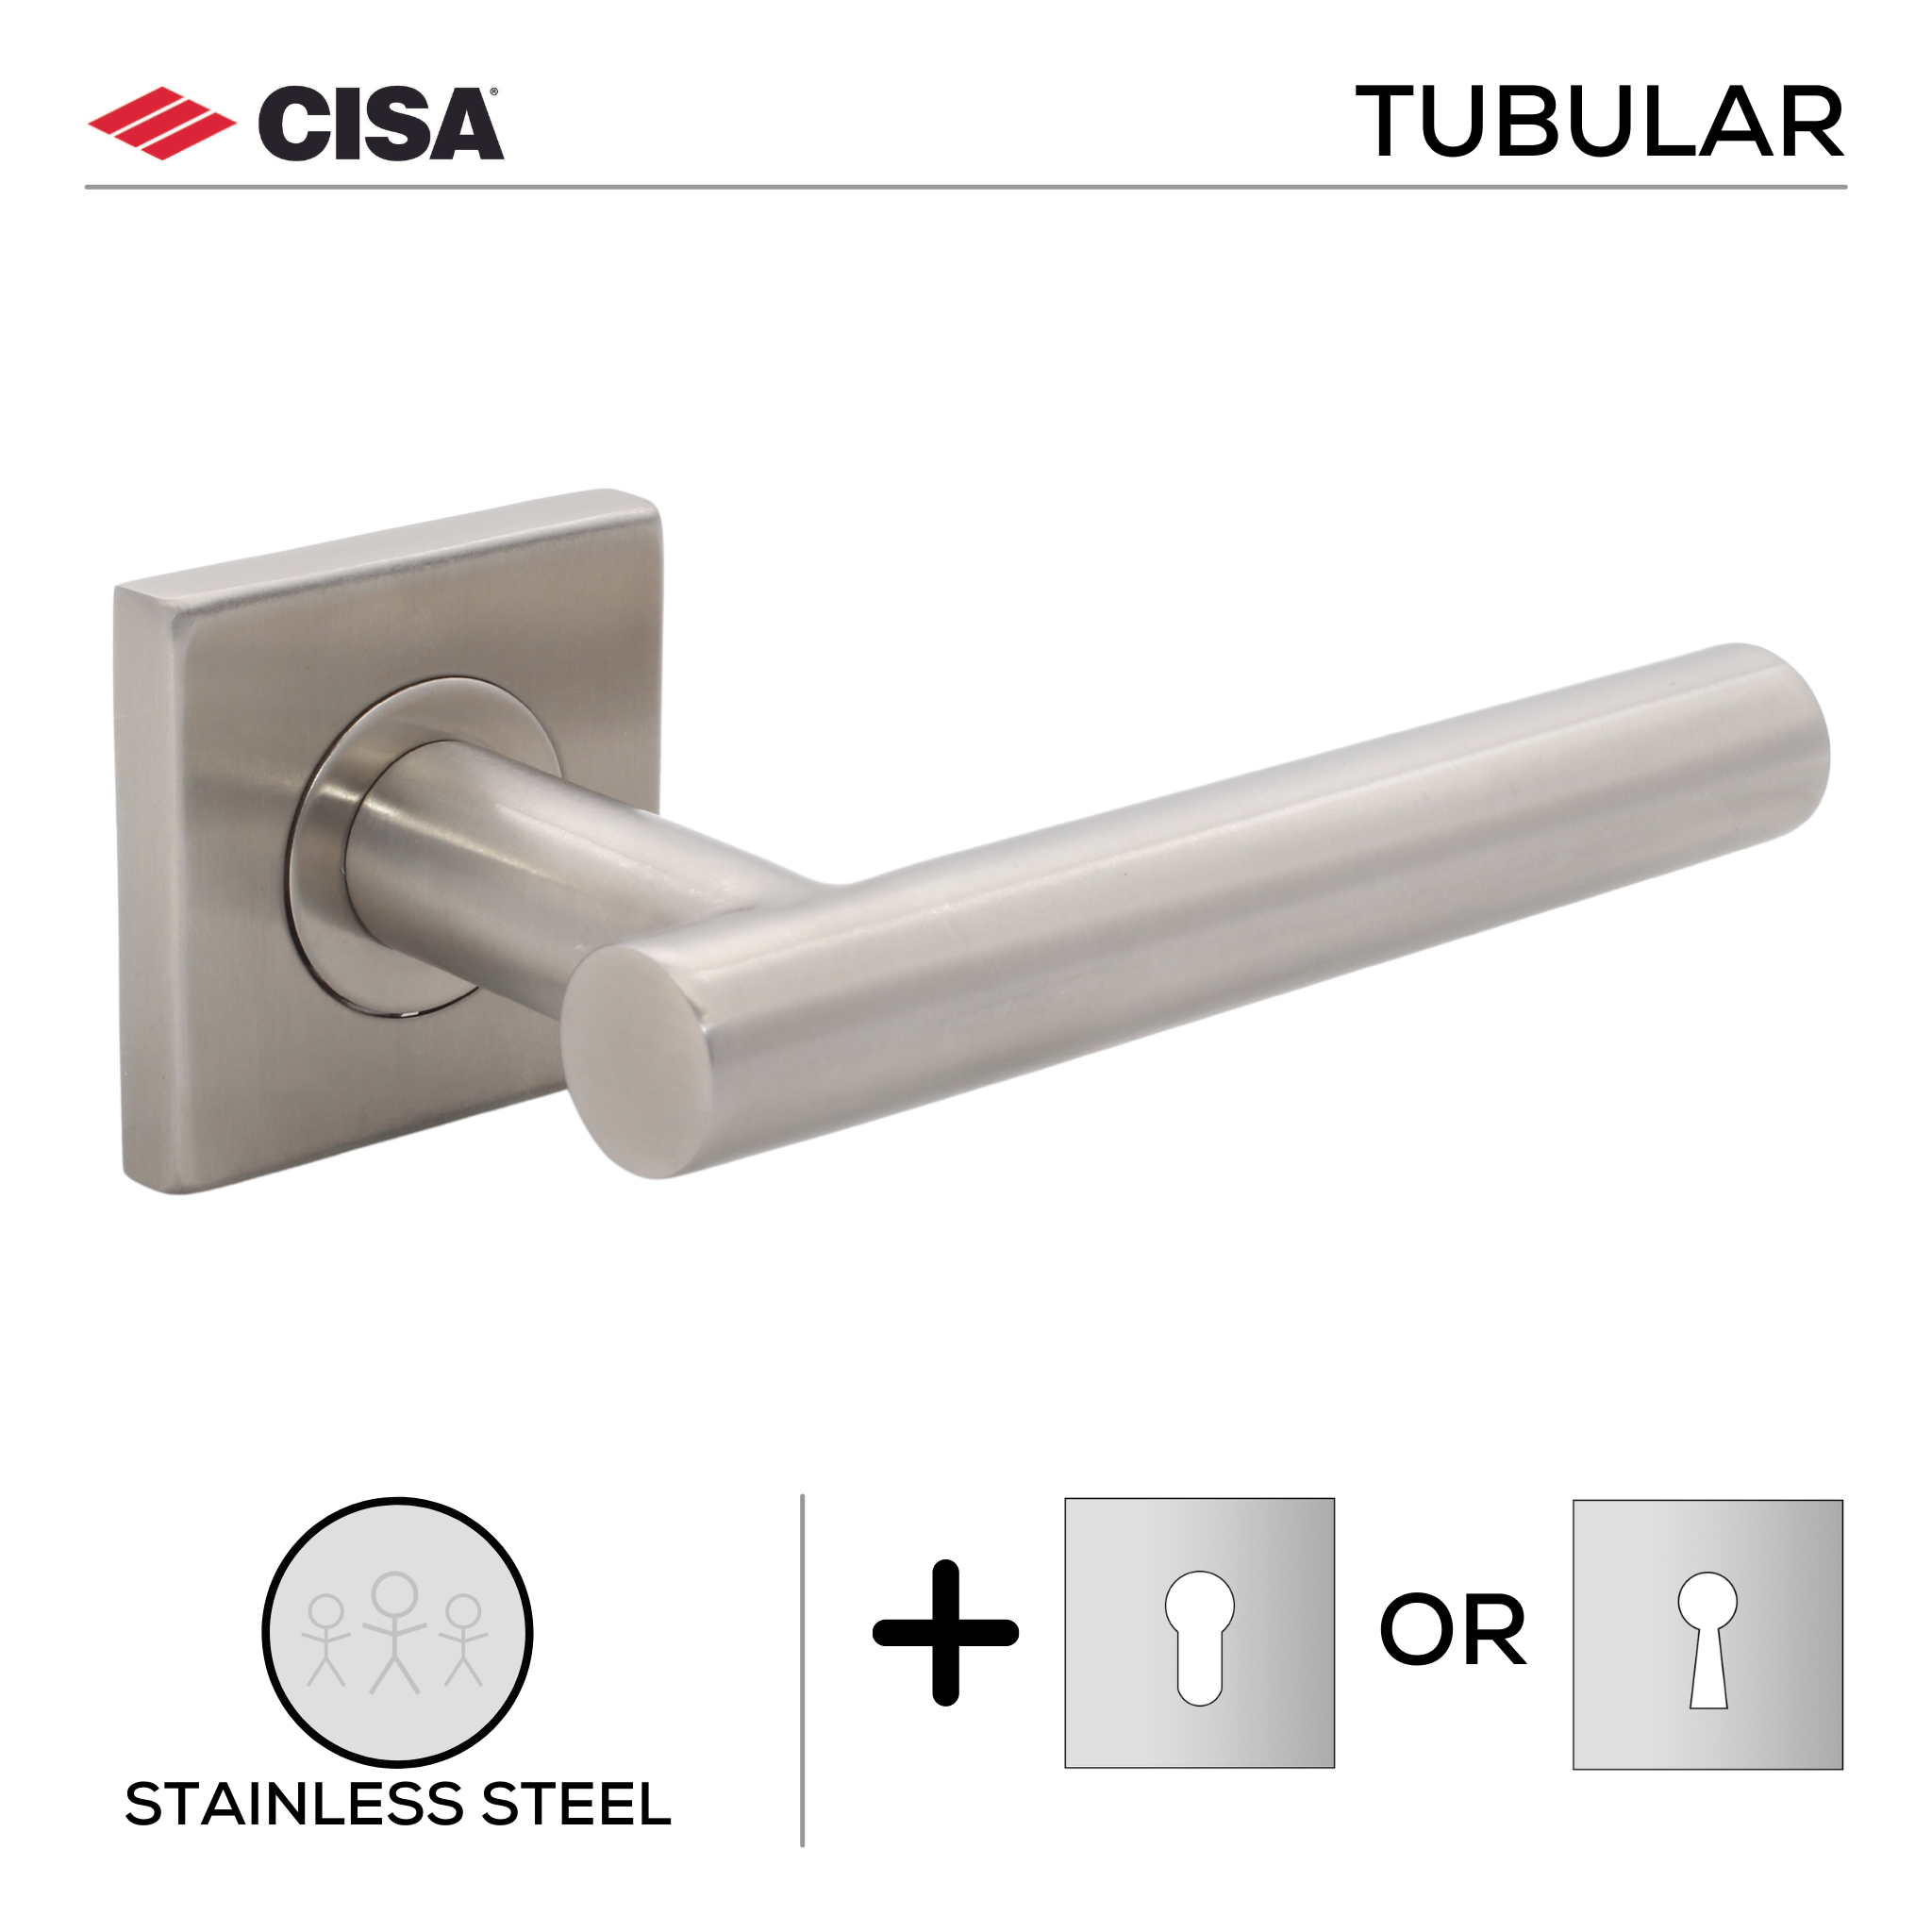 FT06.S._.SS, Lever Handles, Tubular, On Square Rose, With Escutcheons, 134mm (l), Stainless Steel, CISA